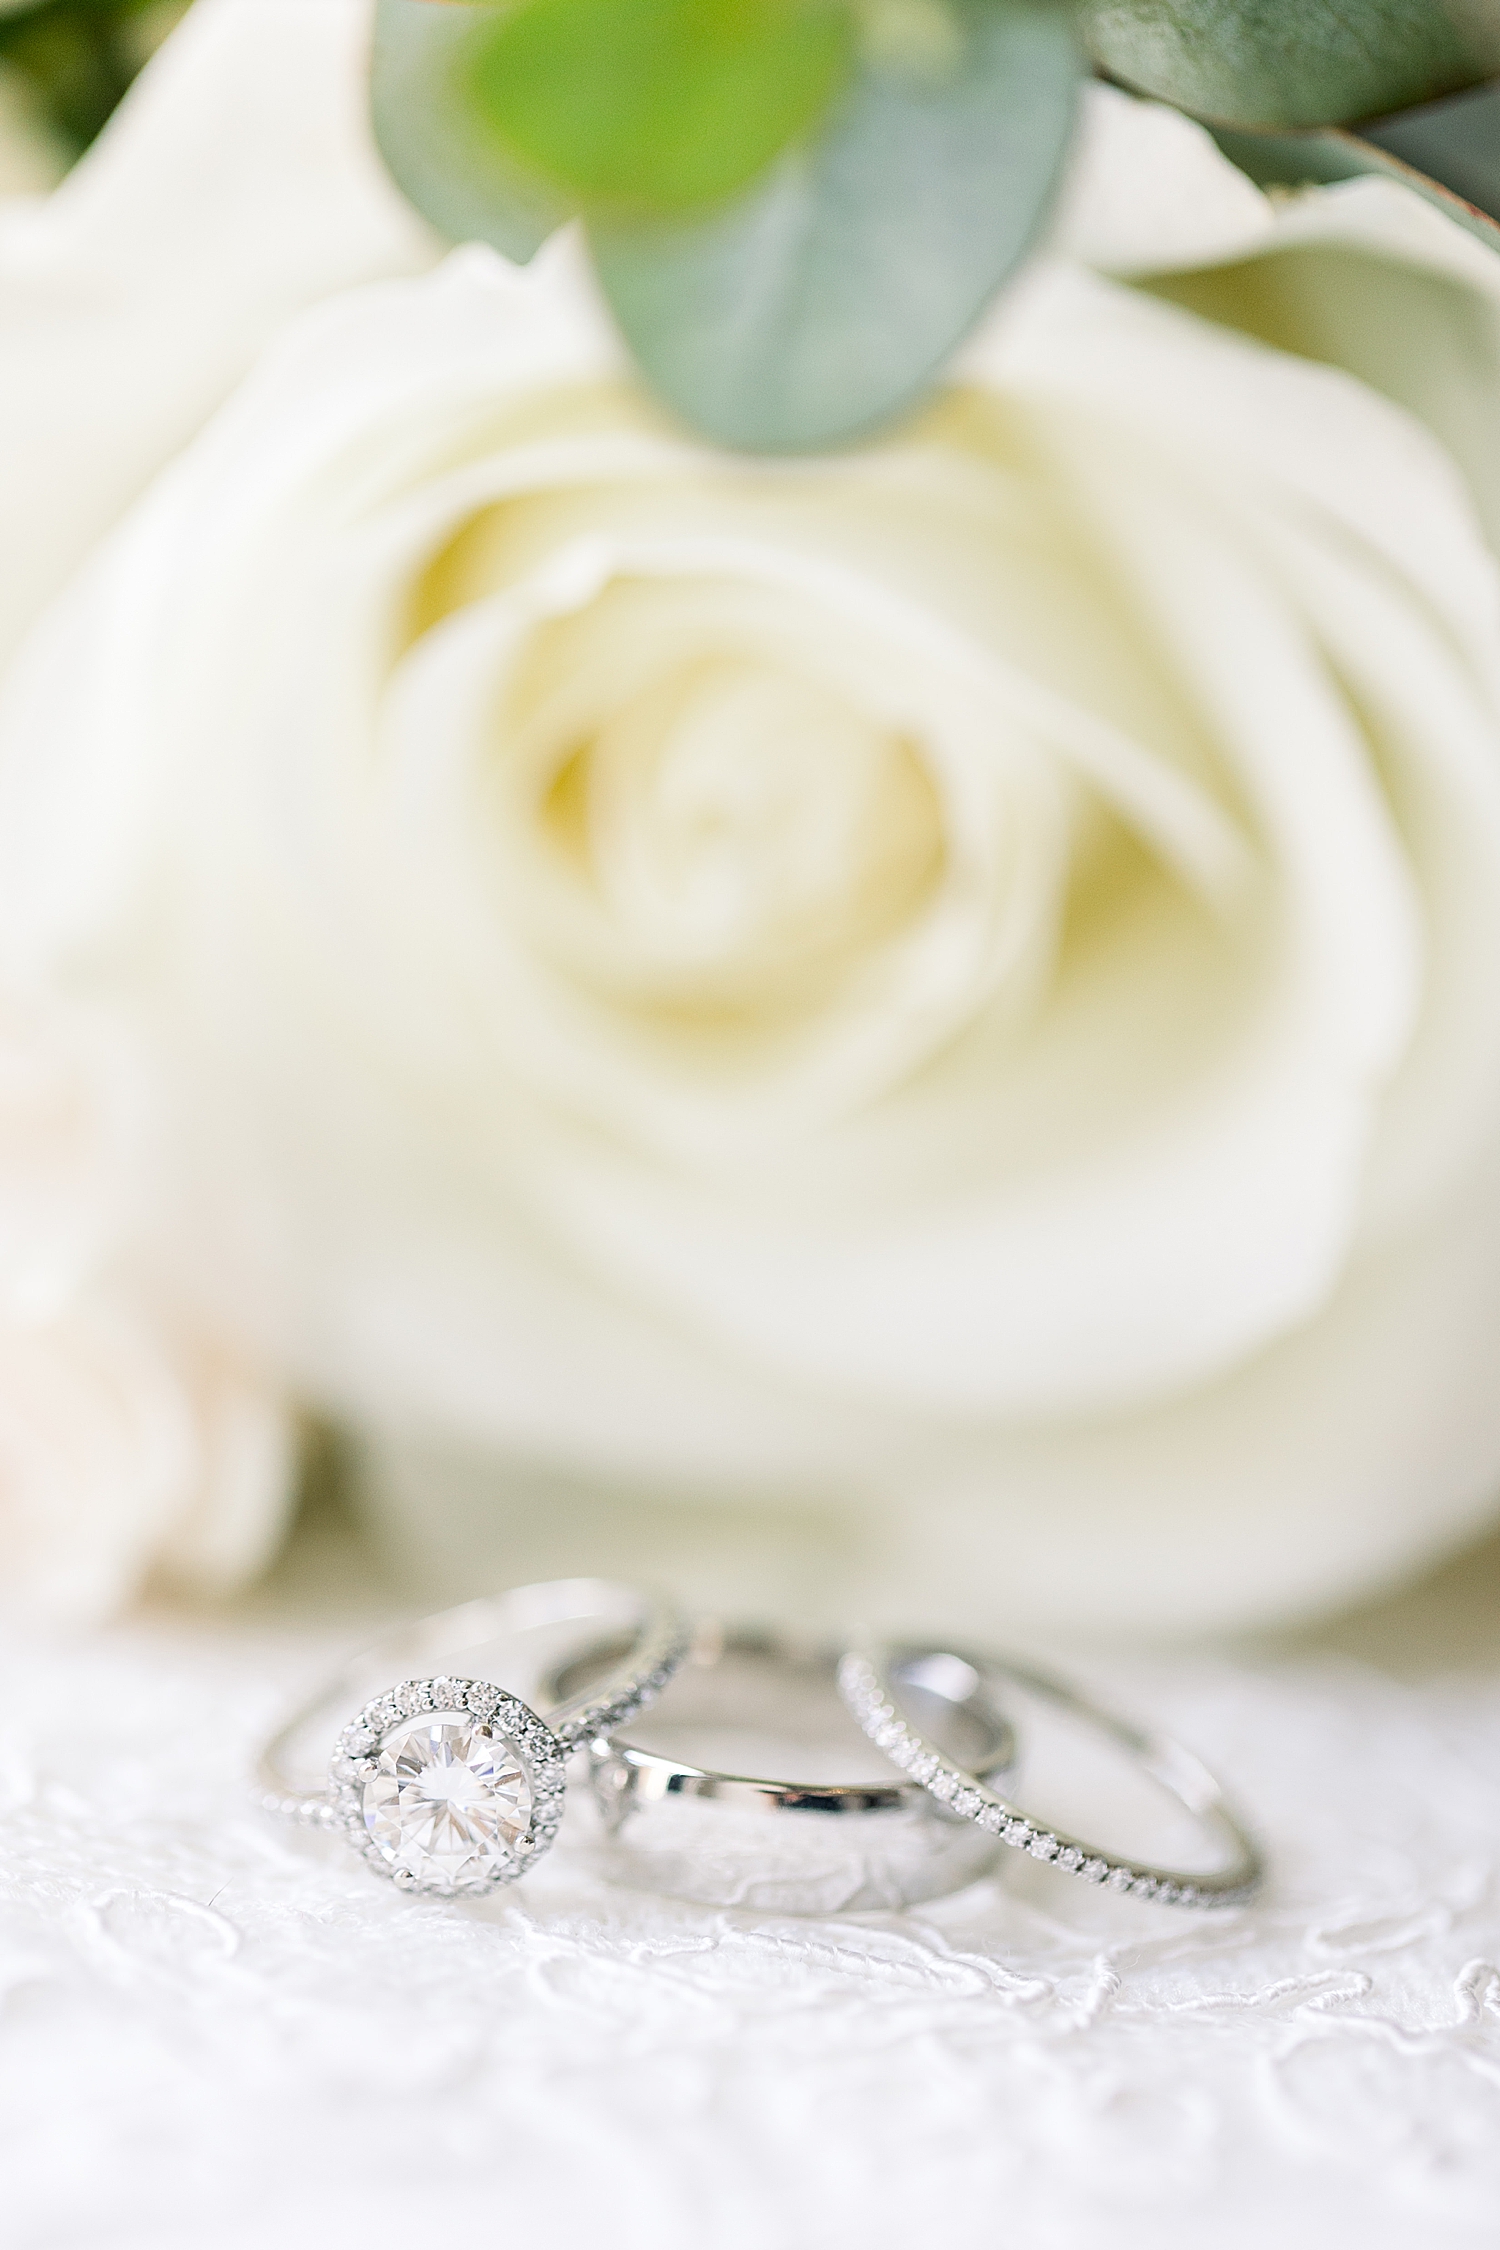 wedding rings lay in front of white rose before AL wedding